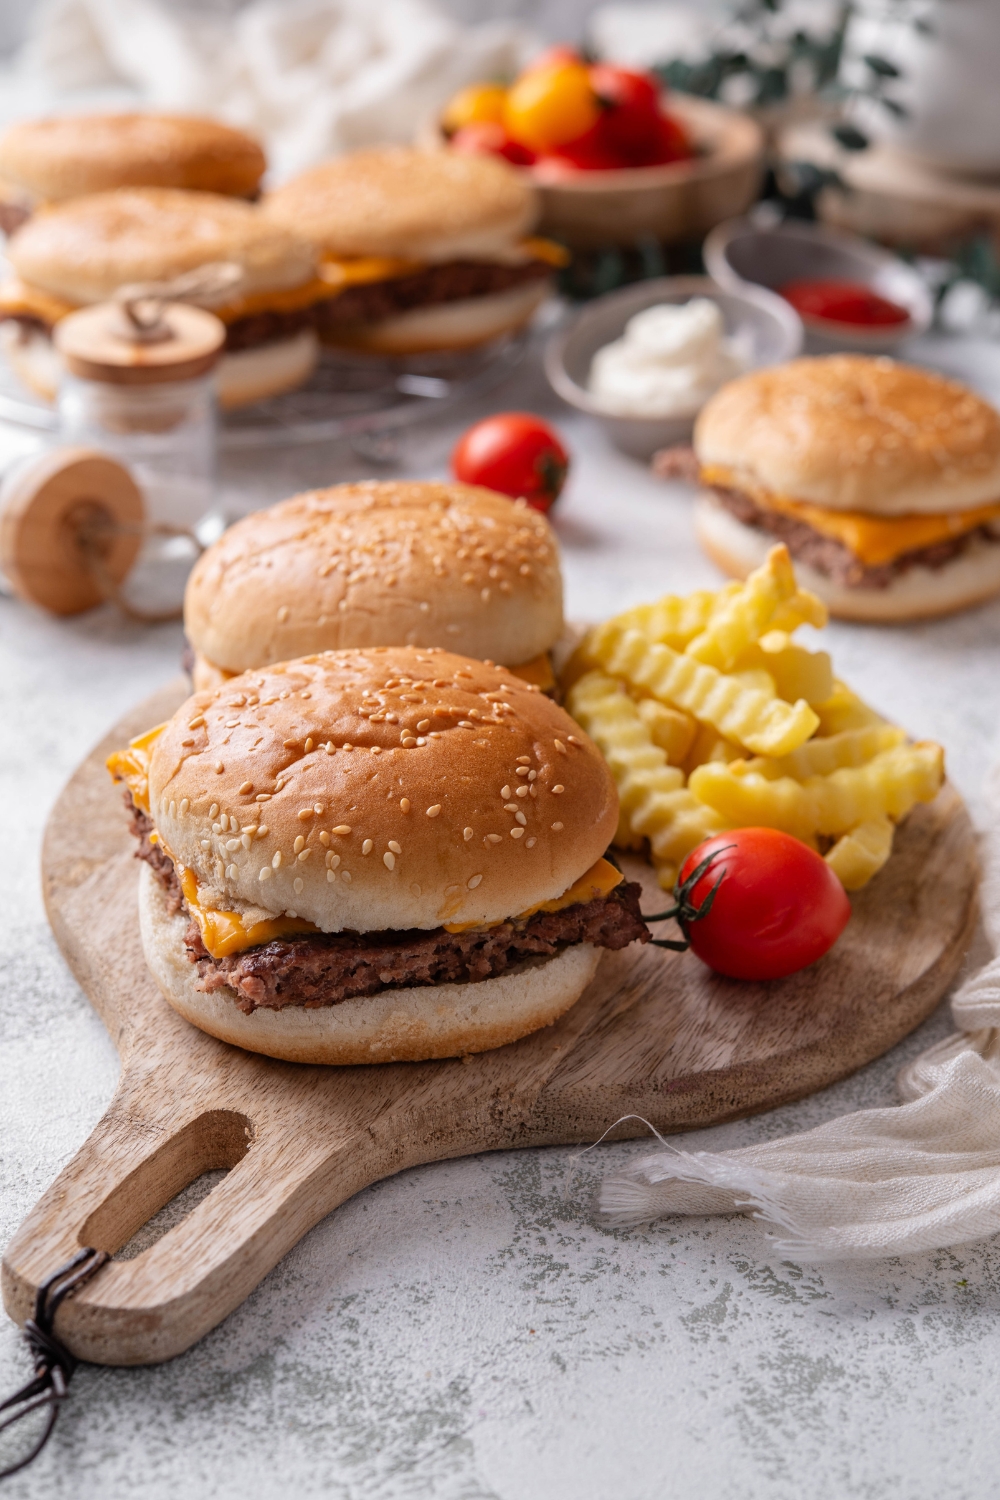 Two white castle sliders and french fries sit on a wooden serving board.